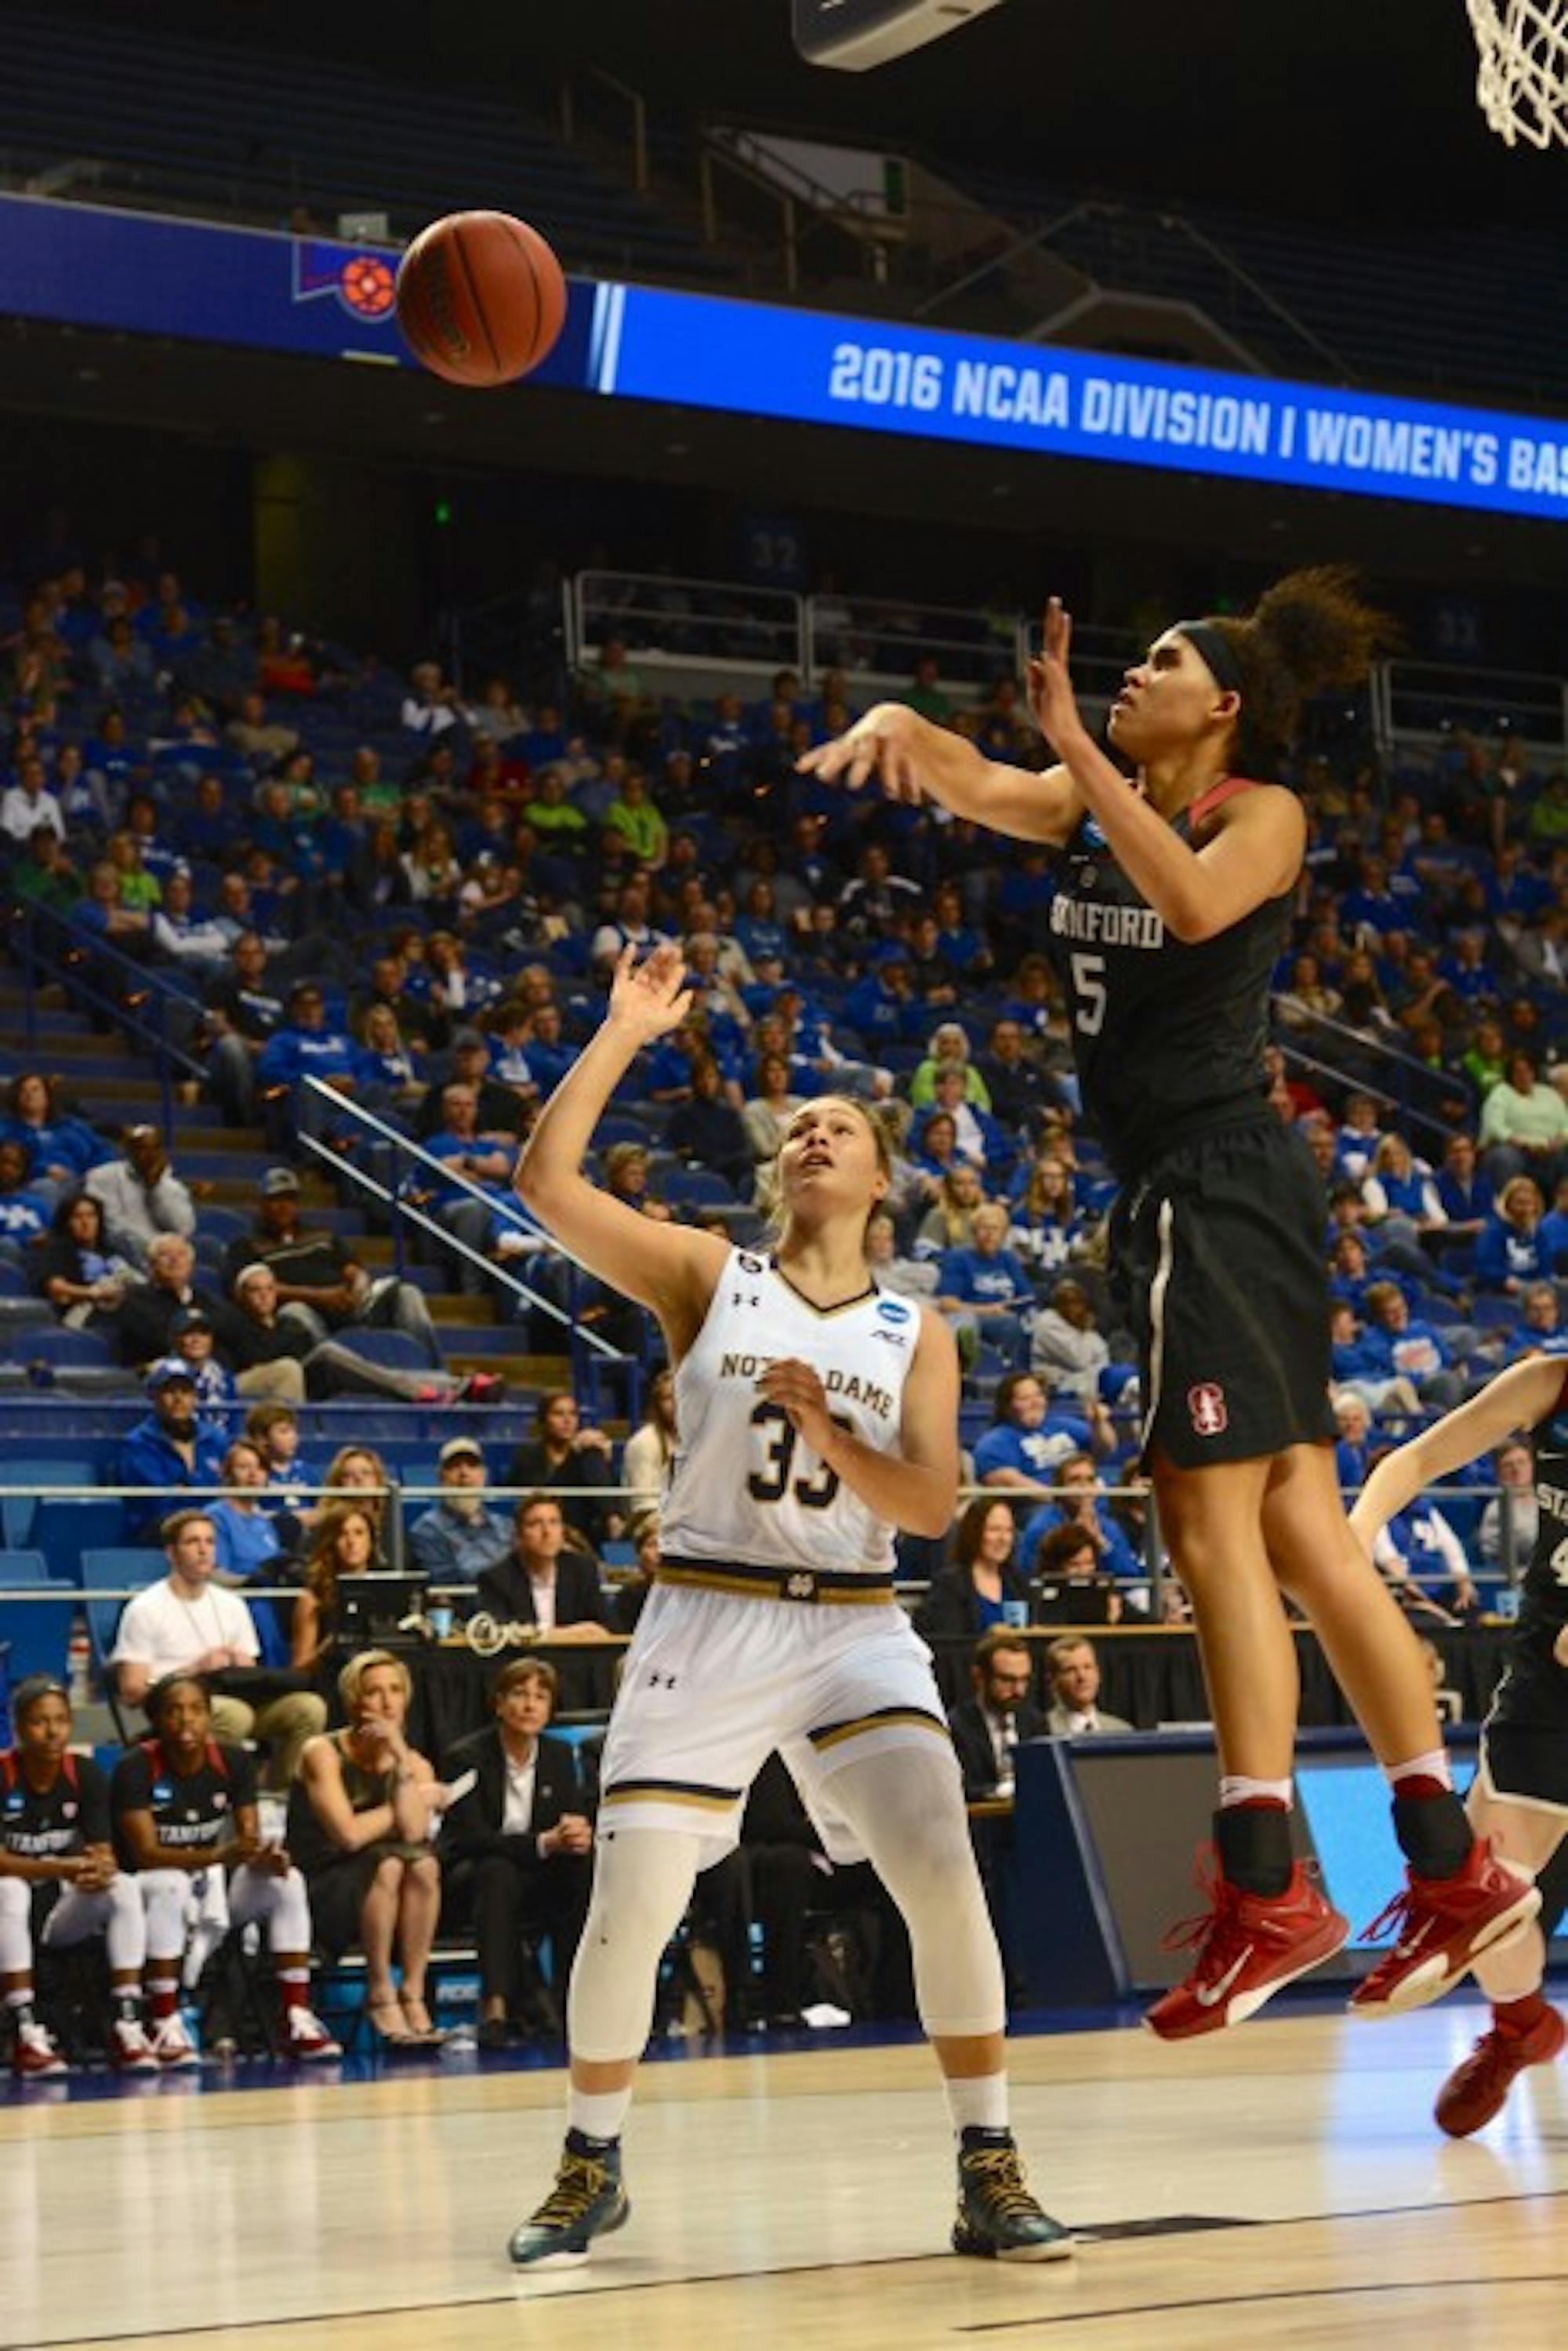 Irish sophomore forward Kathryn Westbeld has her shot blocked during Notre Dame's 90-84 loss to Stanford in the third round of the NCAA tournament Friday night.